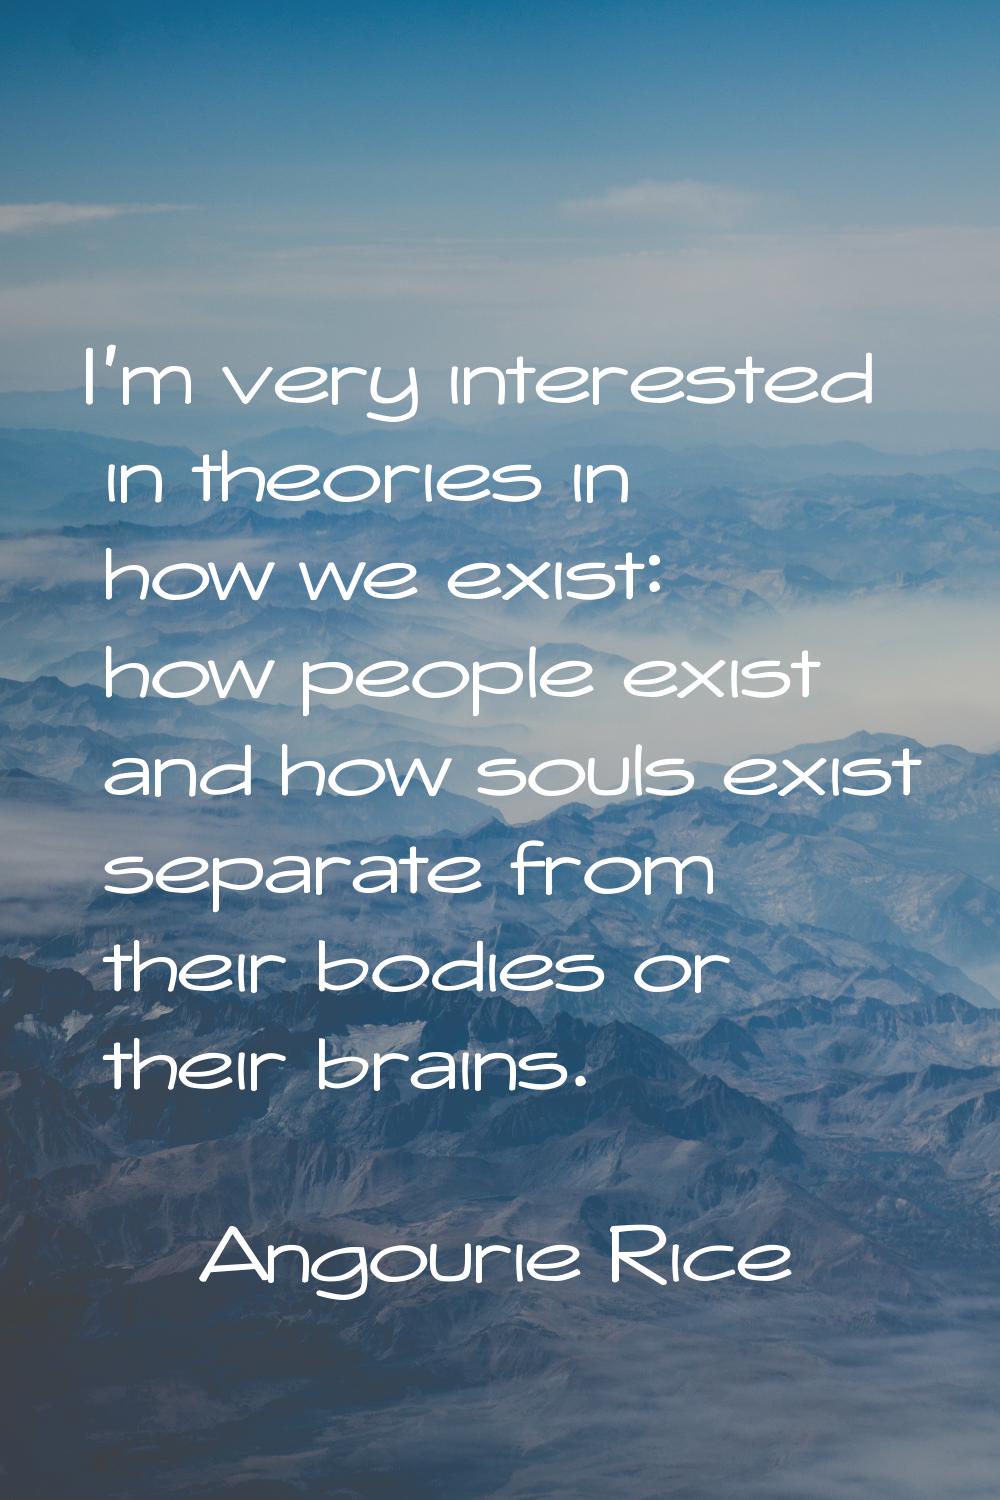 I'm very interested in theories in how we exist: how people exist and how souls exist separate from